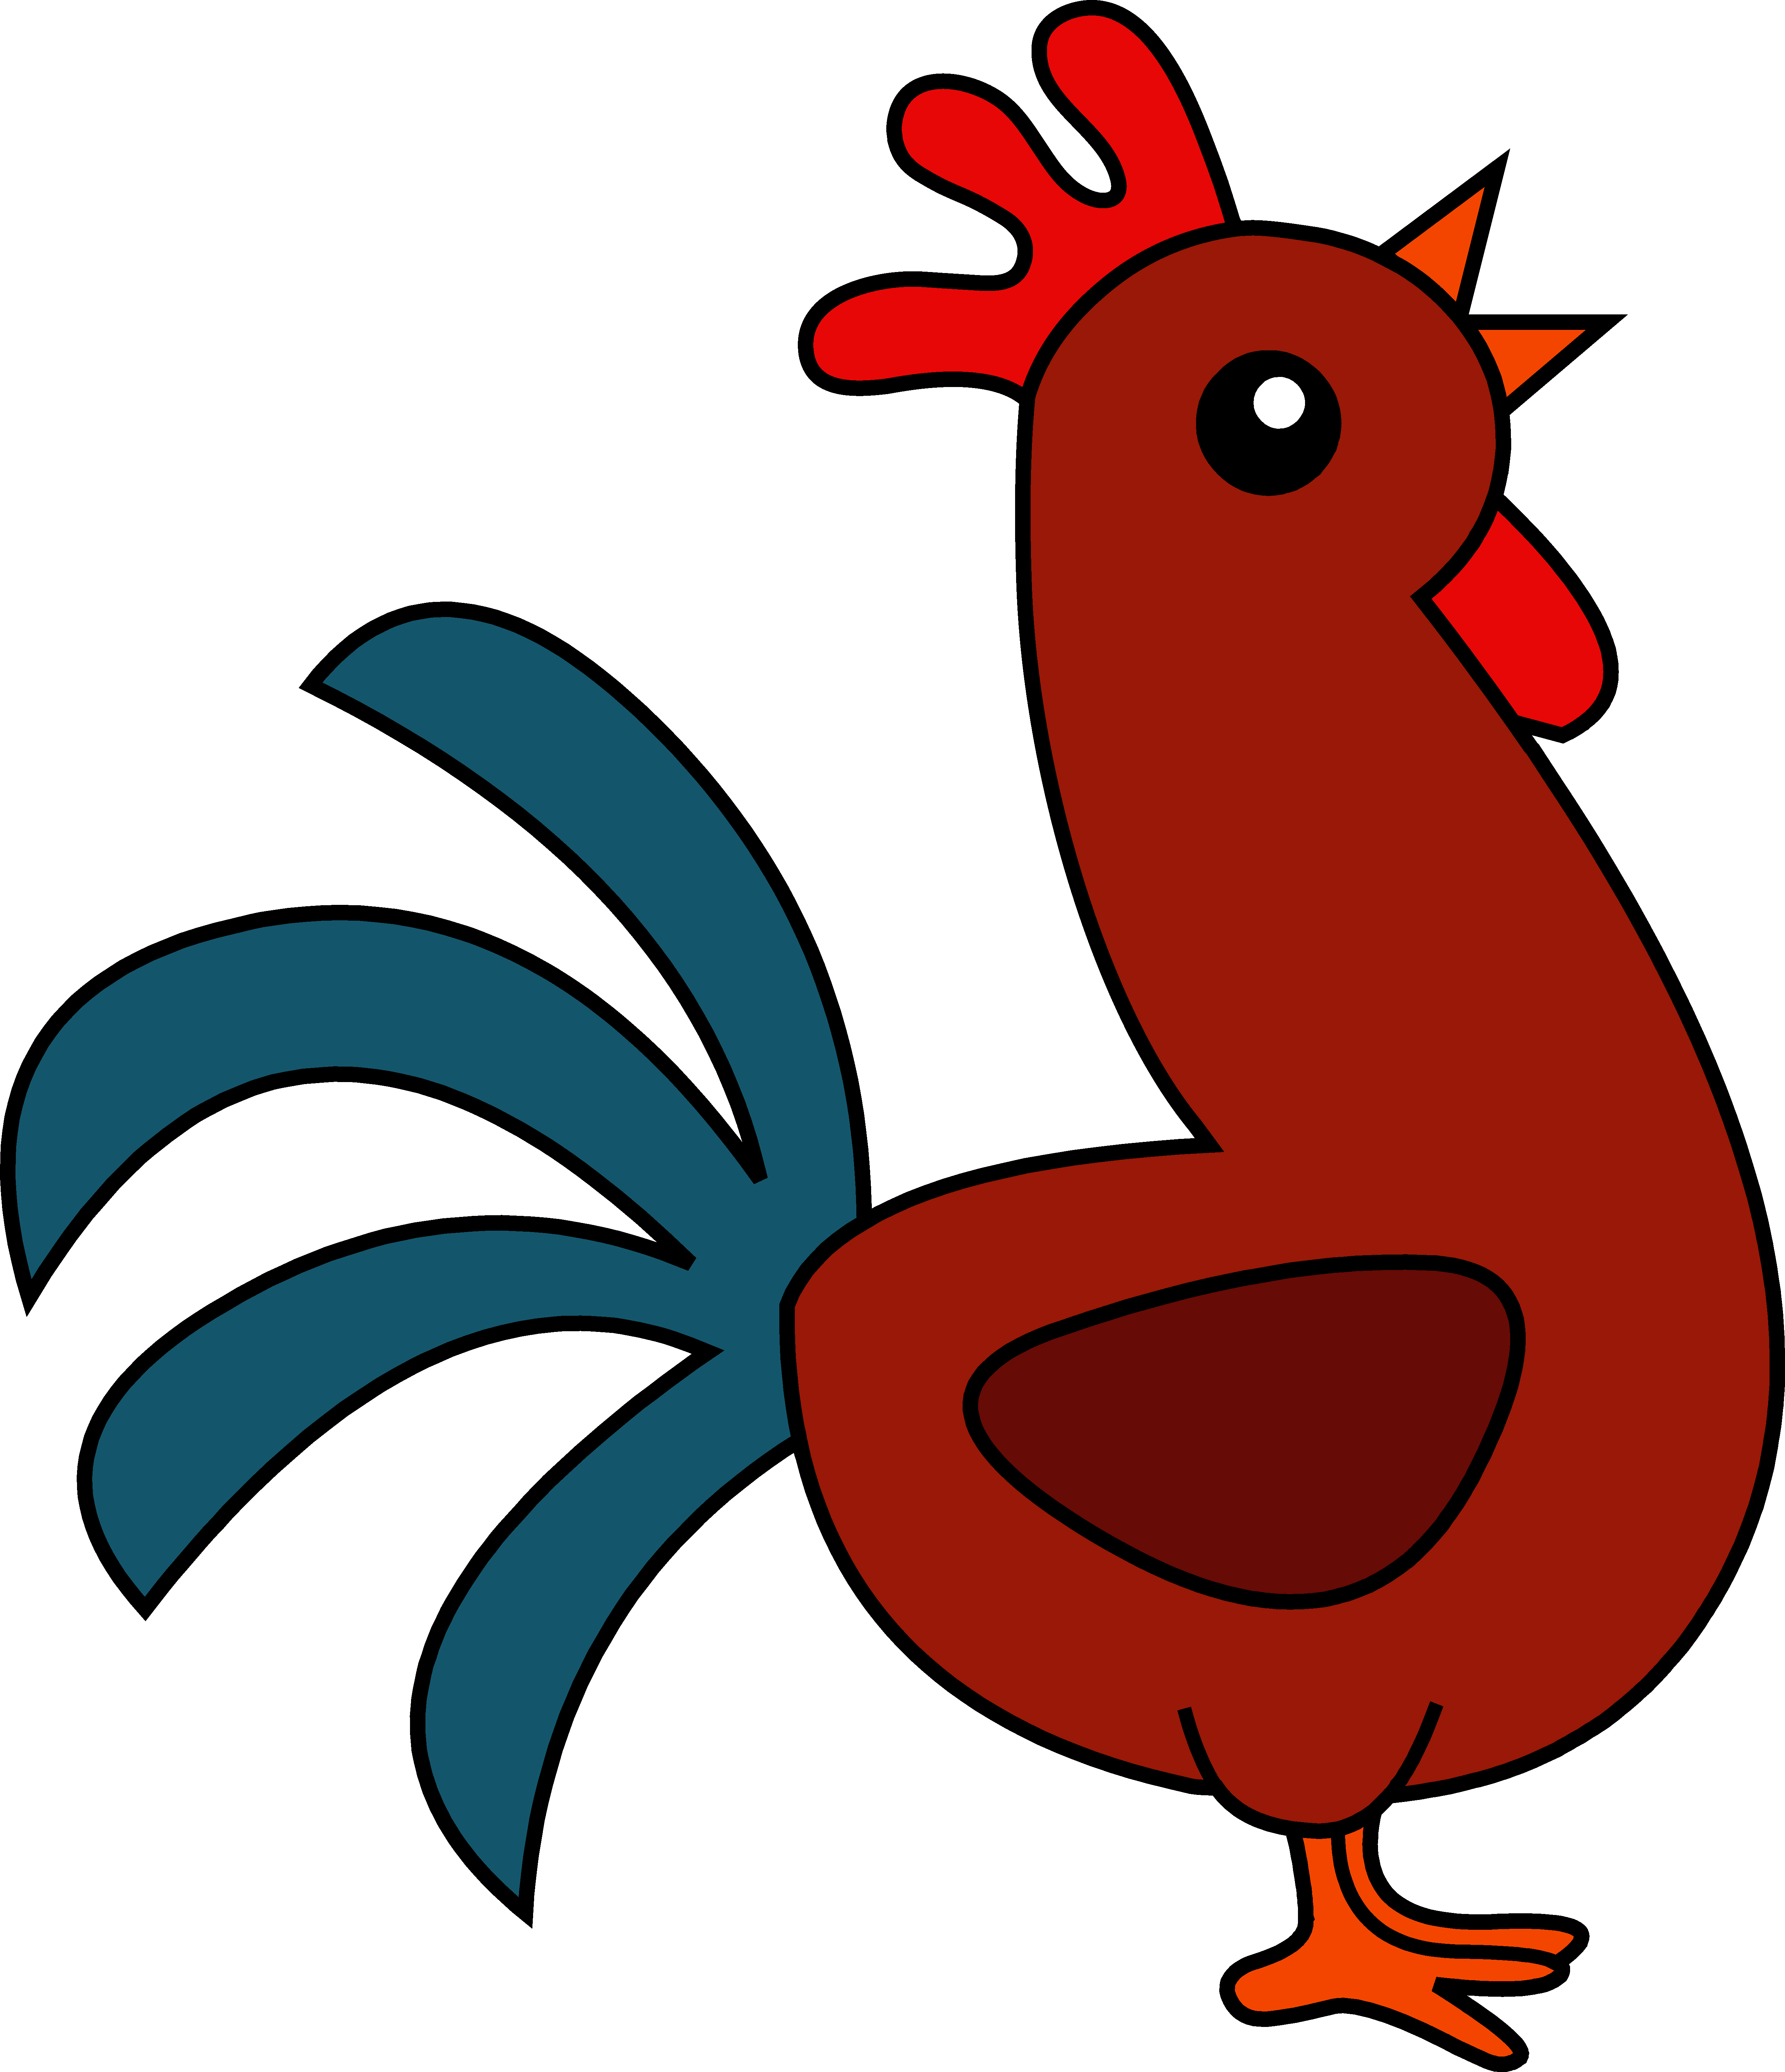 Cute Brown Rooster Clip Art | Clipart Panda - Free Clipart Images